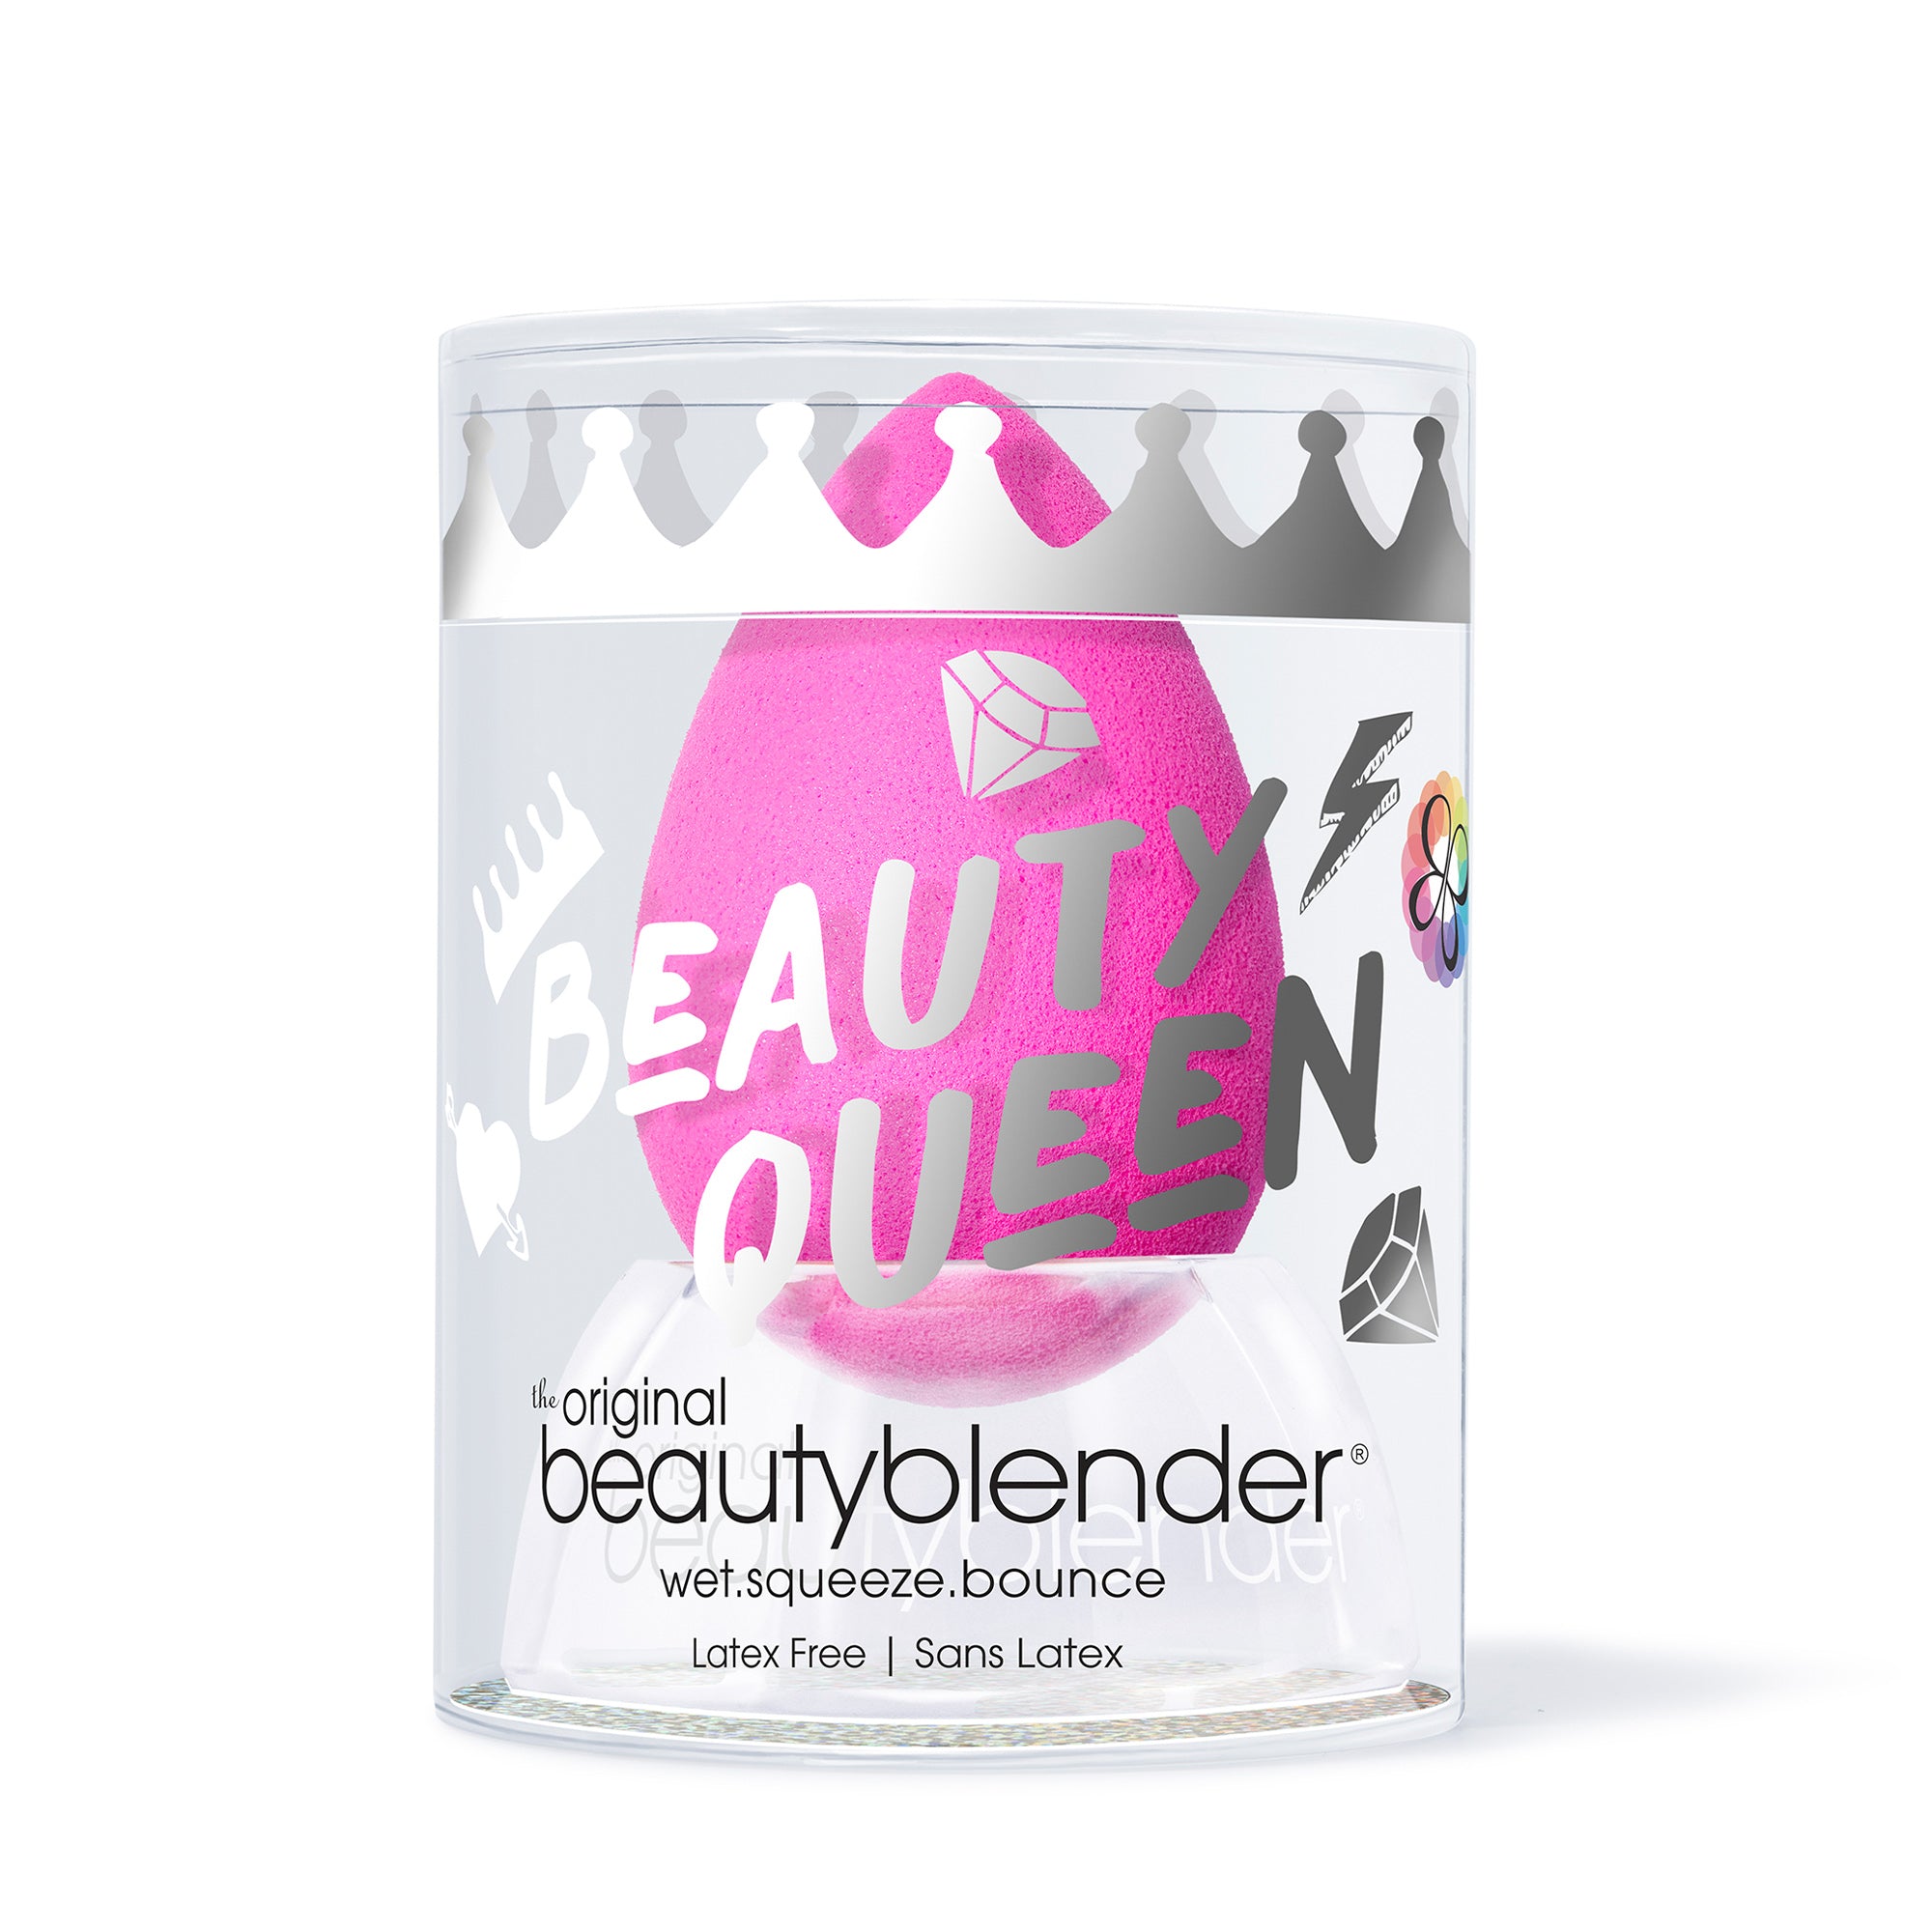 Beautyblender® Original Beauty Queen Limited-Edition with Crystal Nest